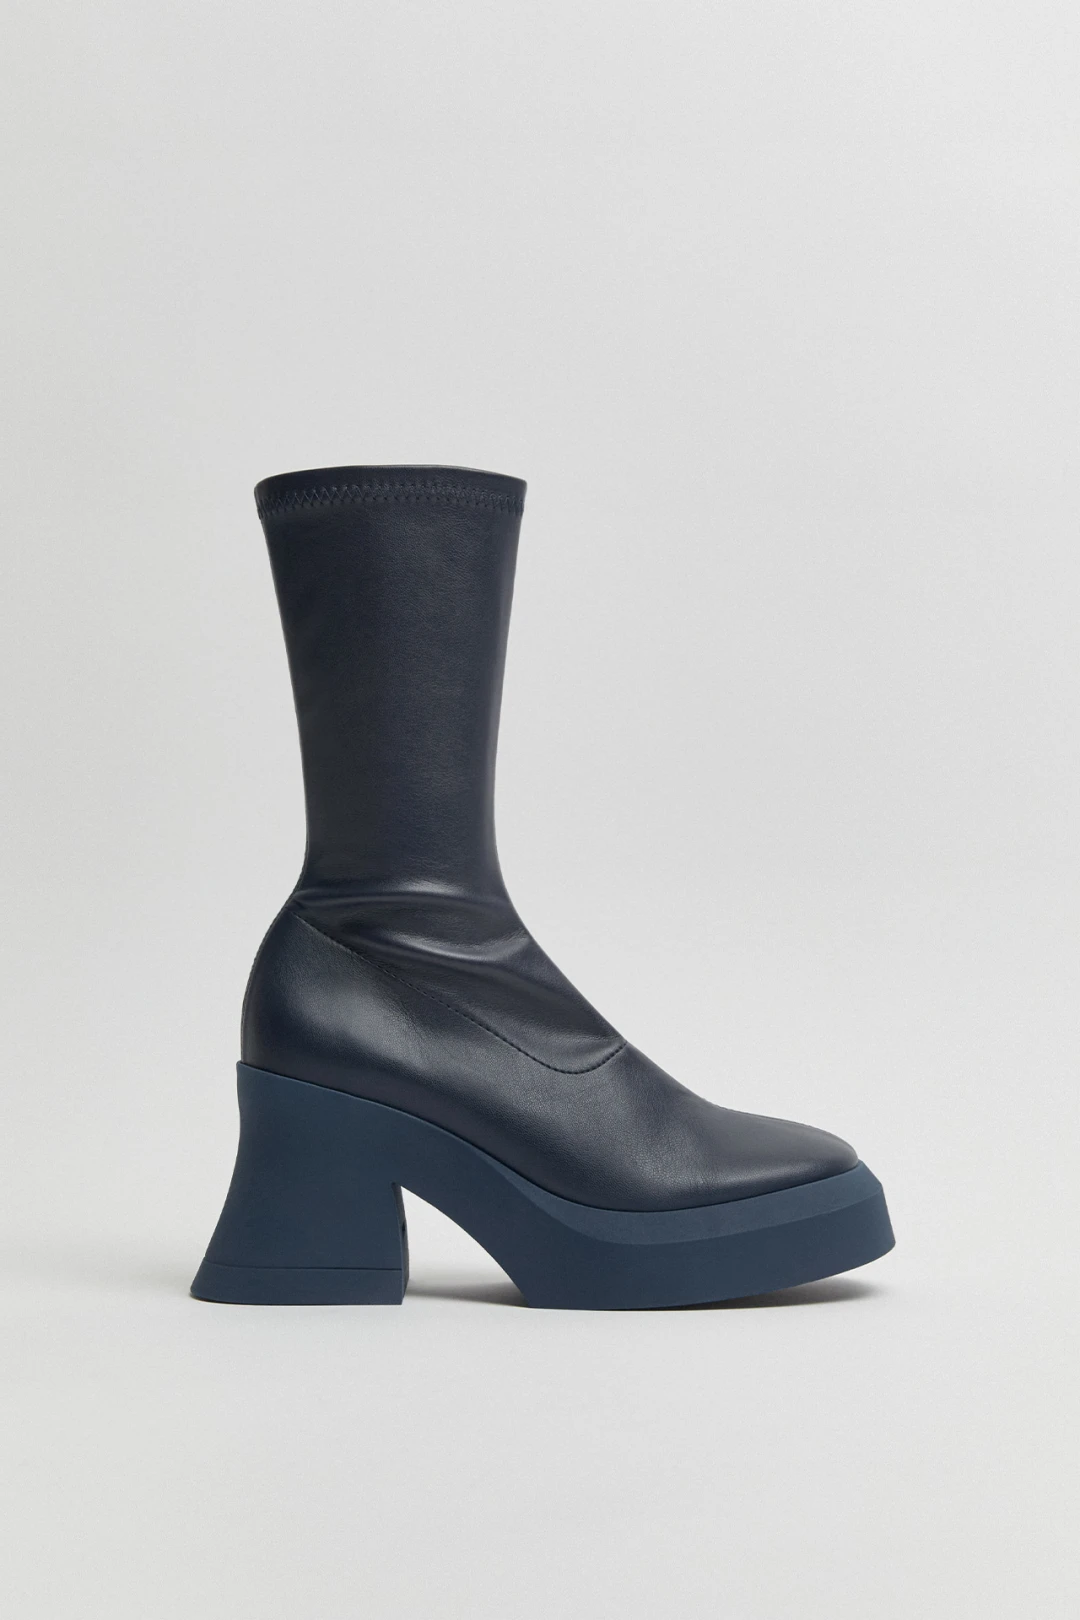 Aura Navy Boots | Miista Europe | Made in Portugal